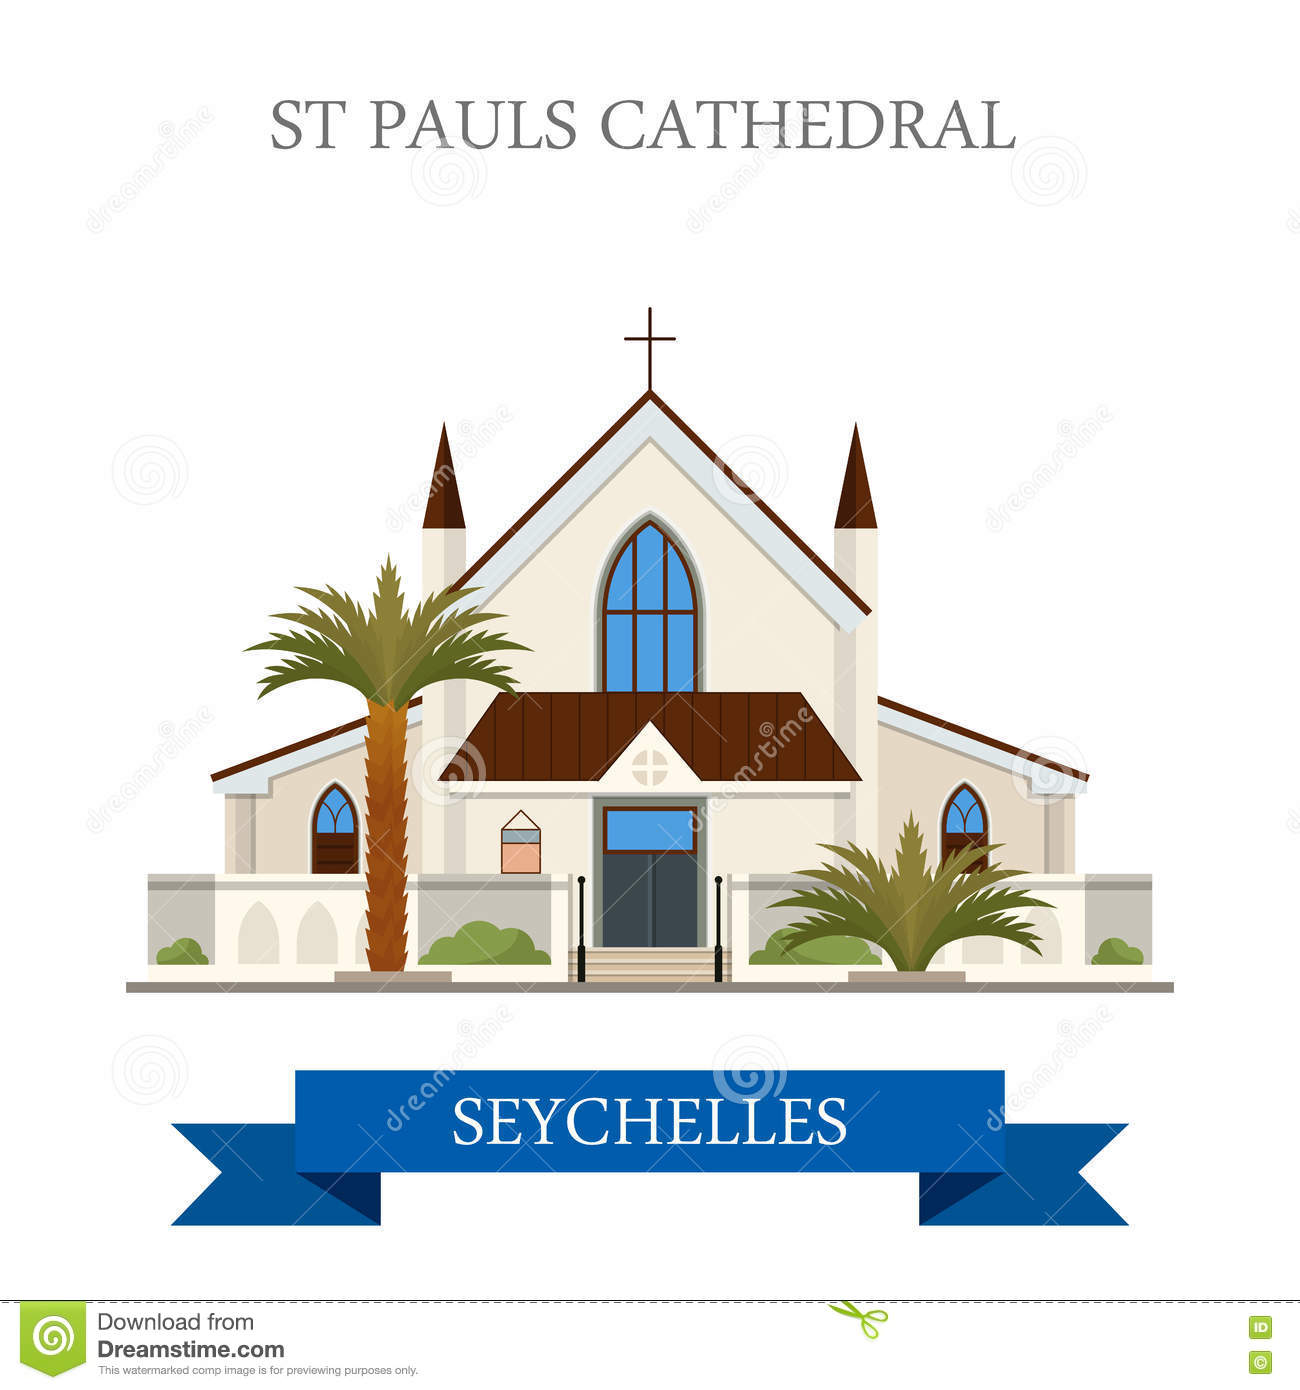 Seychelles clipart #9, Download drawings